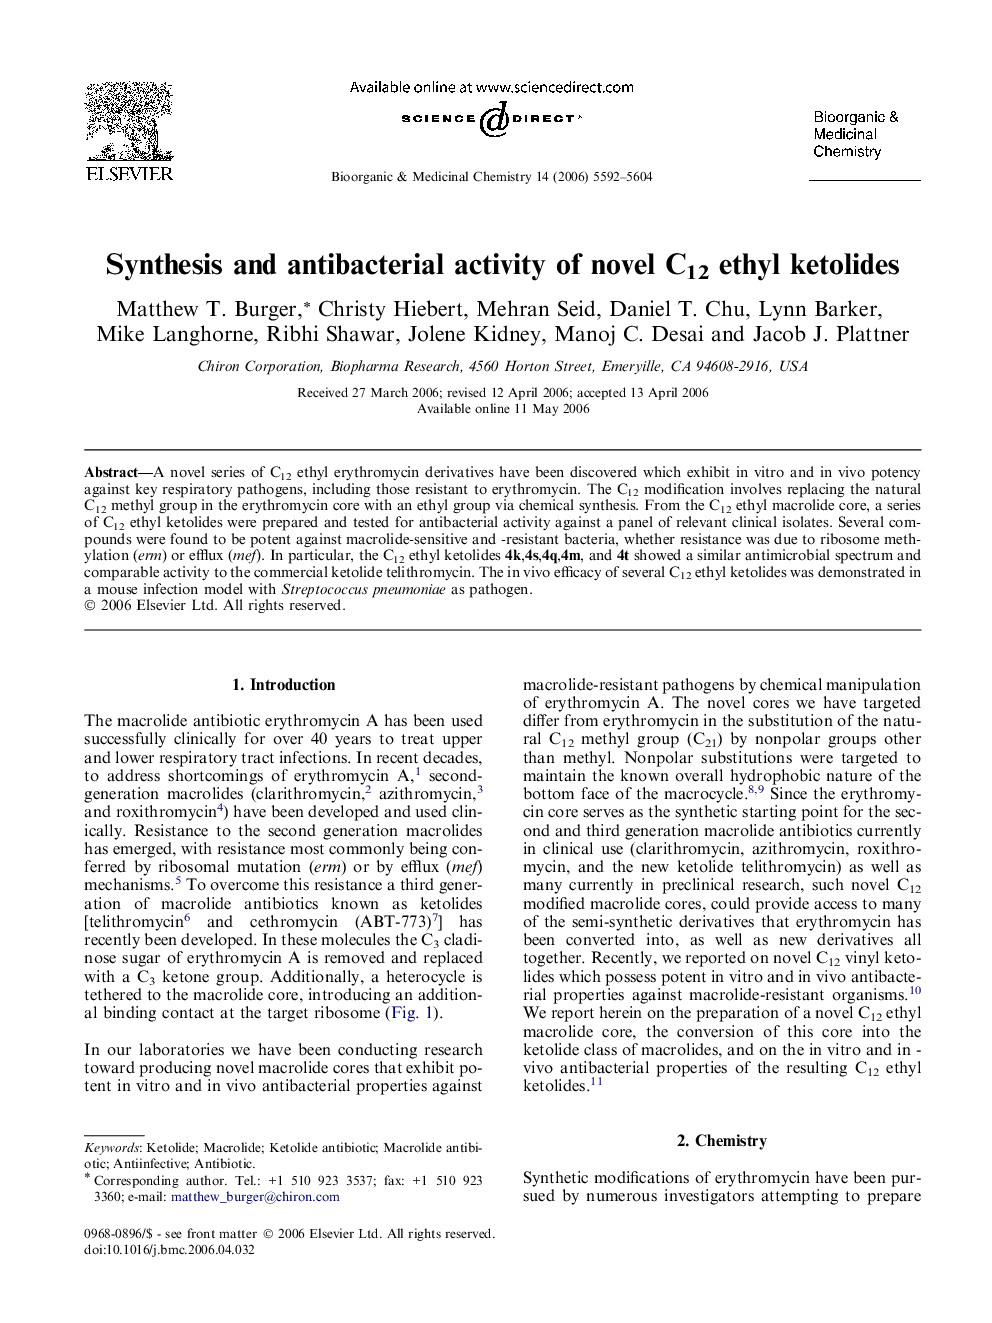 Synthesis and antibacterial activity of novel C12 ethyl ketolides